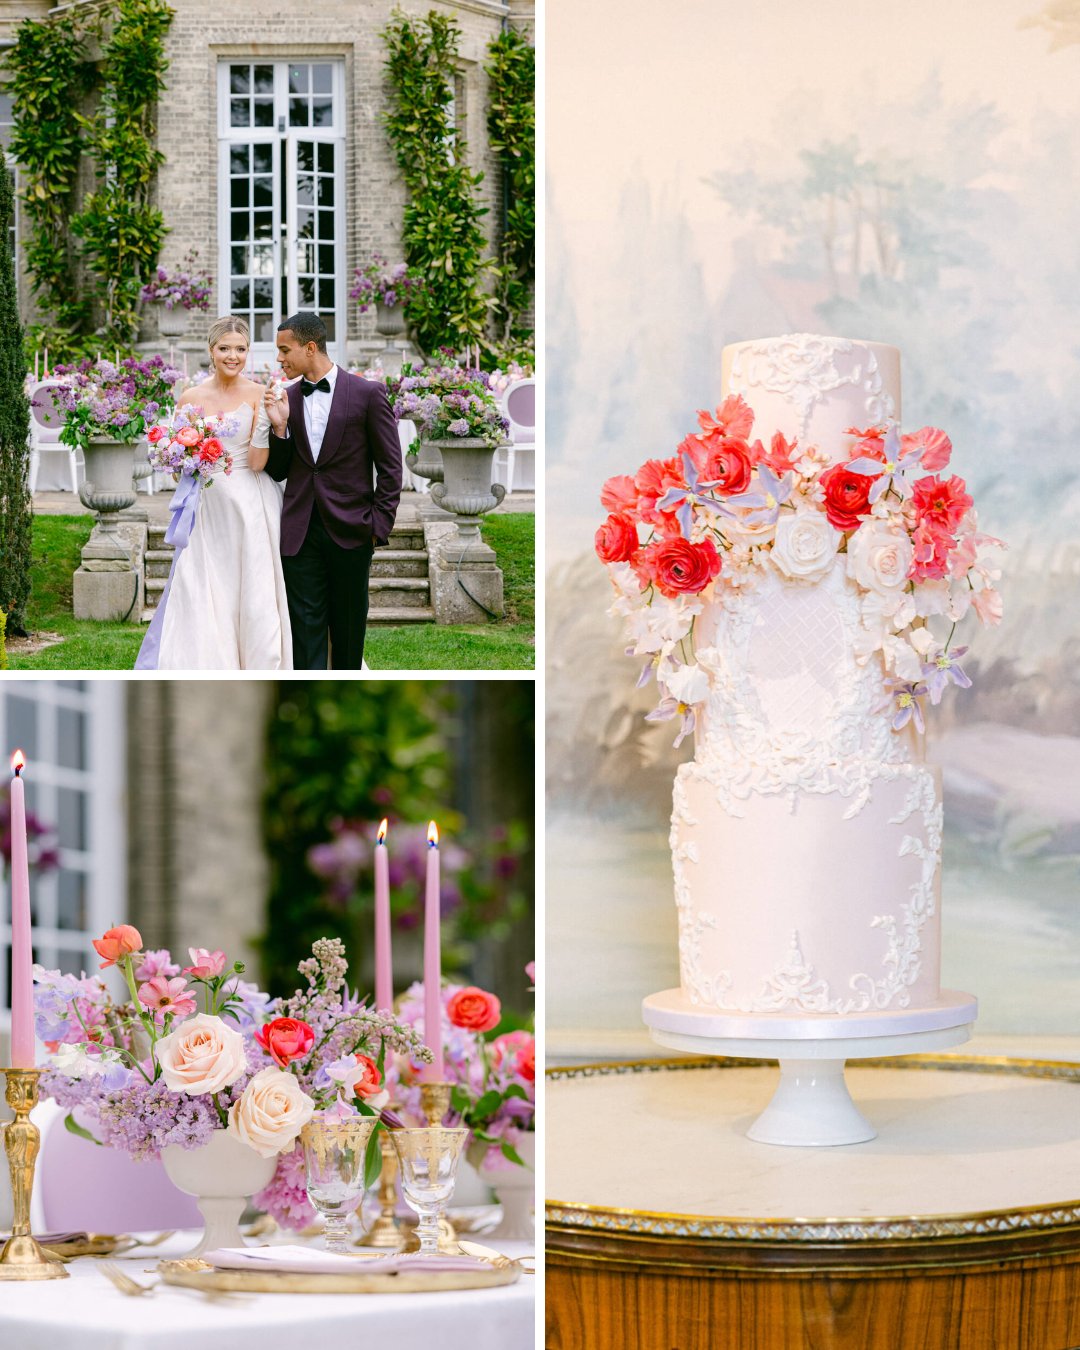 Collage of wedding cake adorned with flowers, a table with floral centerpieces and tapered candles and a wedding couple posing in the garden of a manor